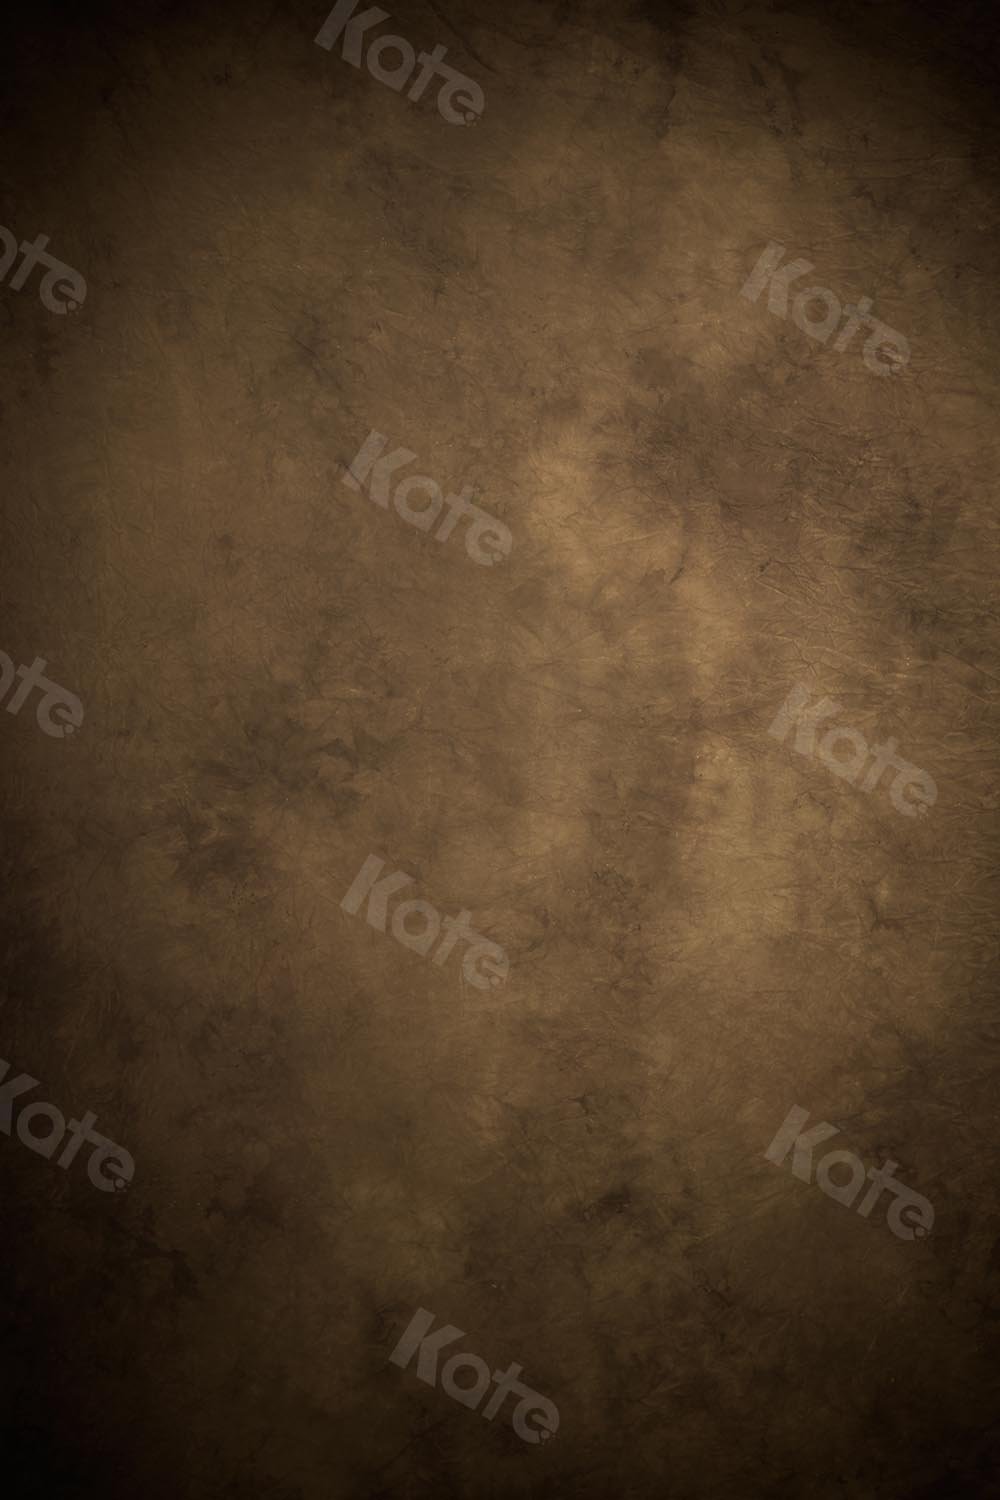 Kate Sepia Abstract Brown Textured Backdrop Designed by Kate Image